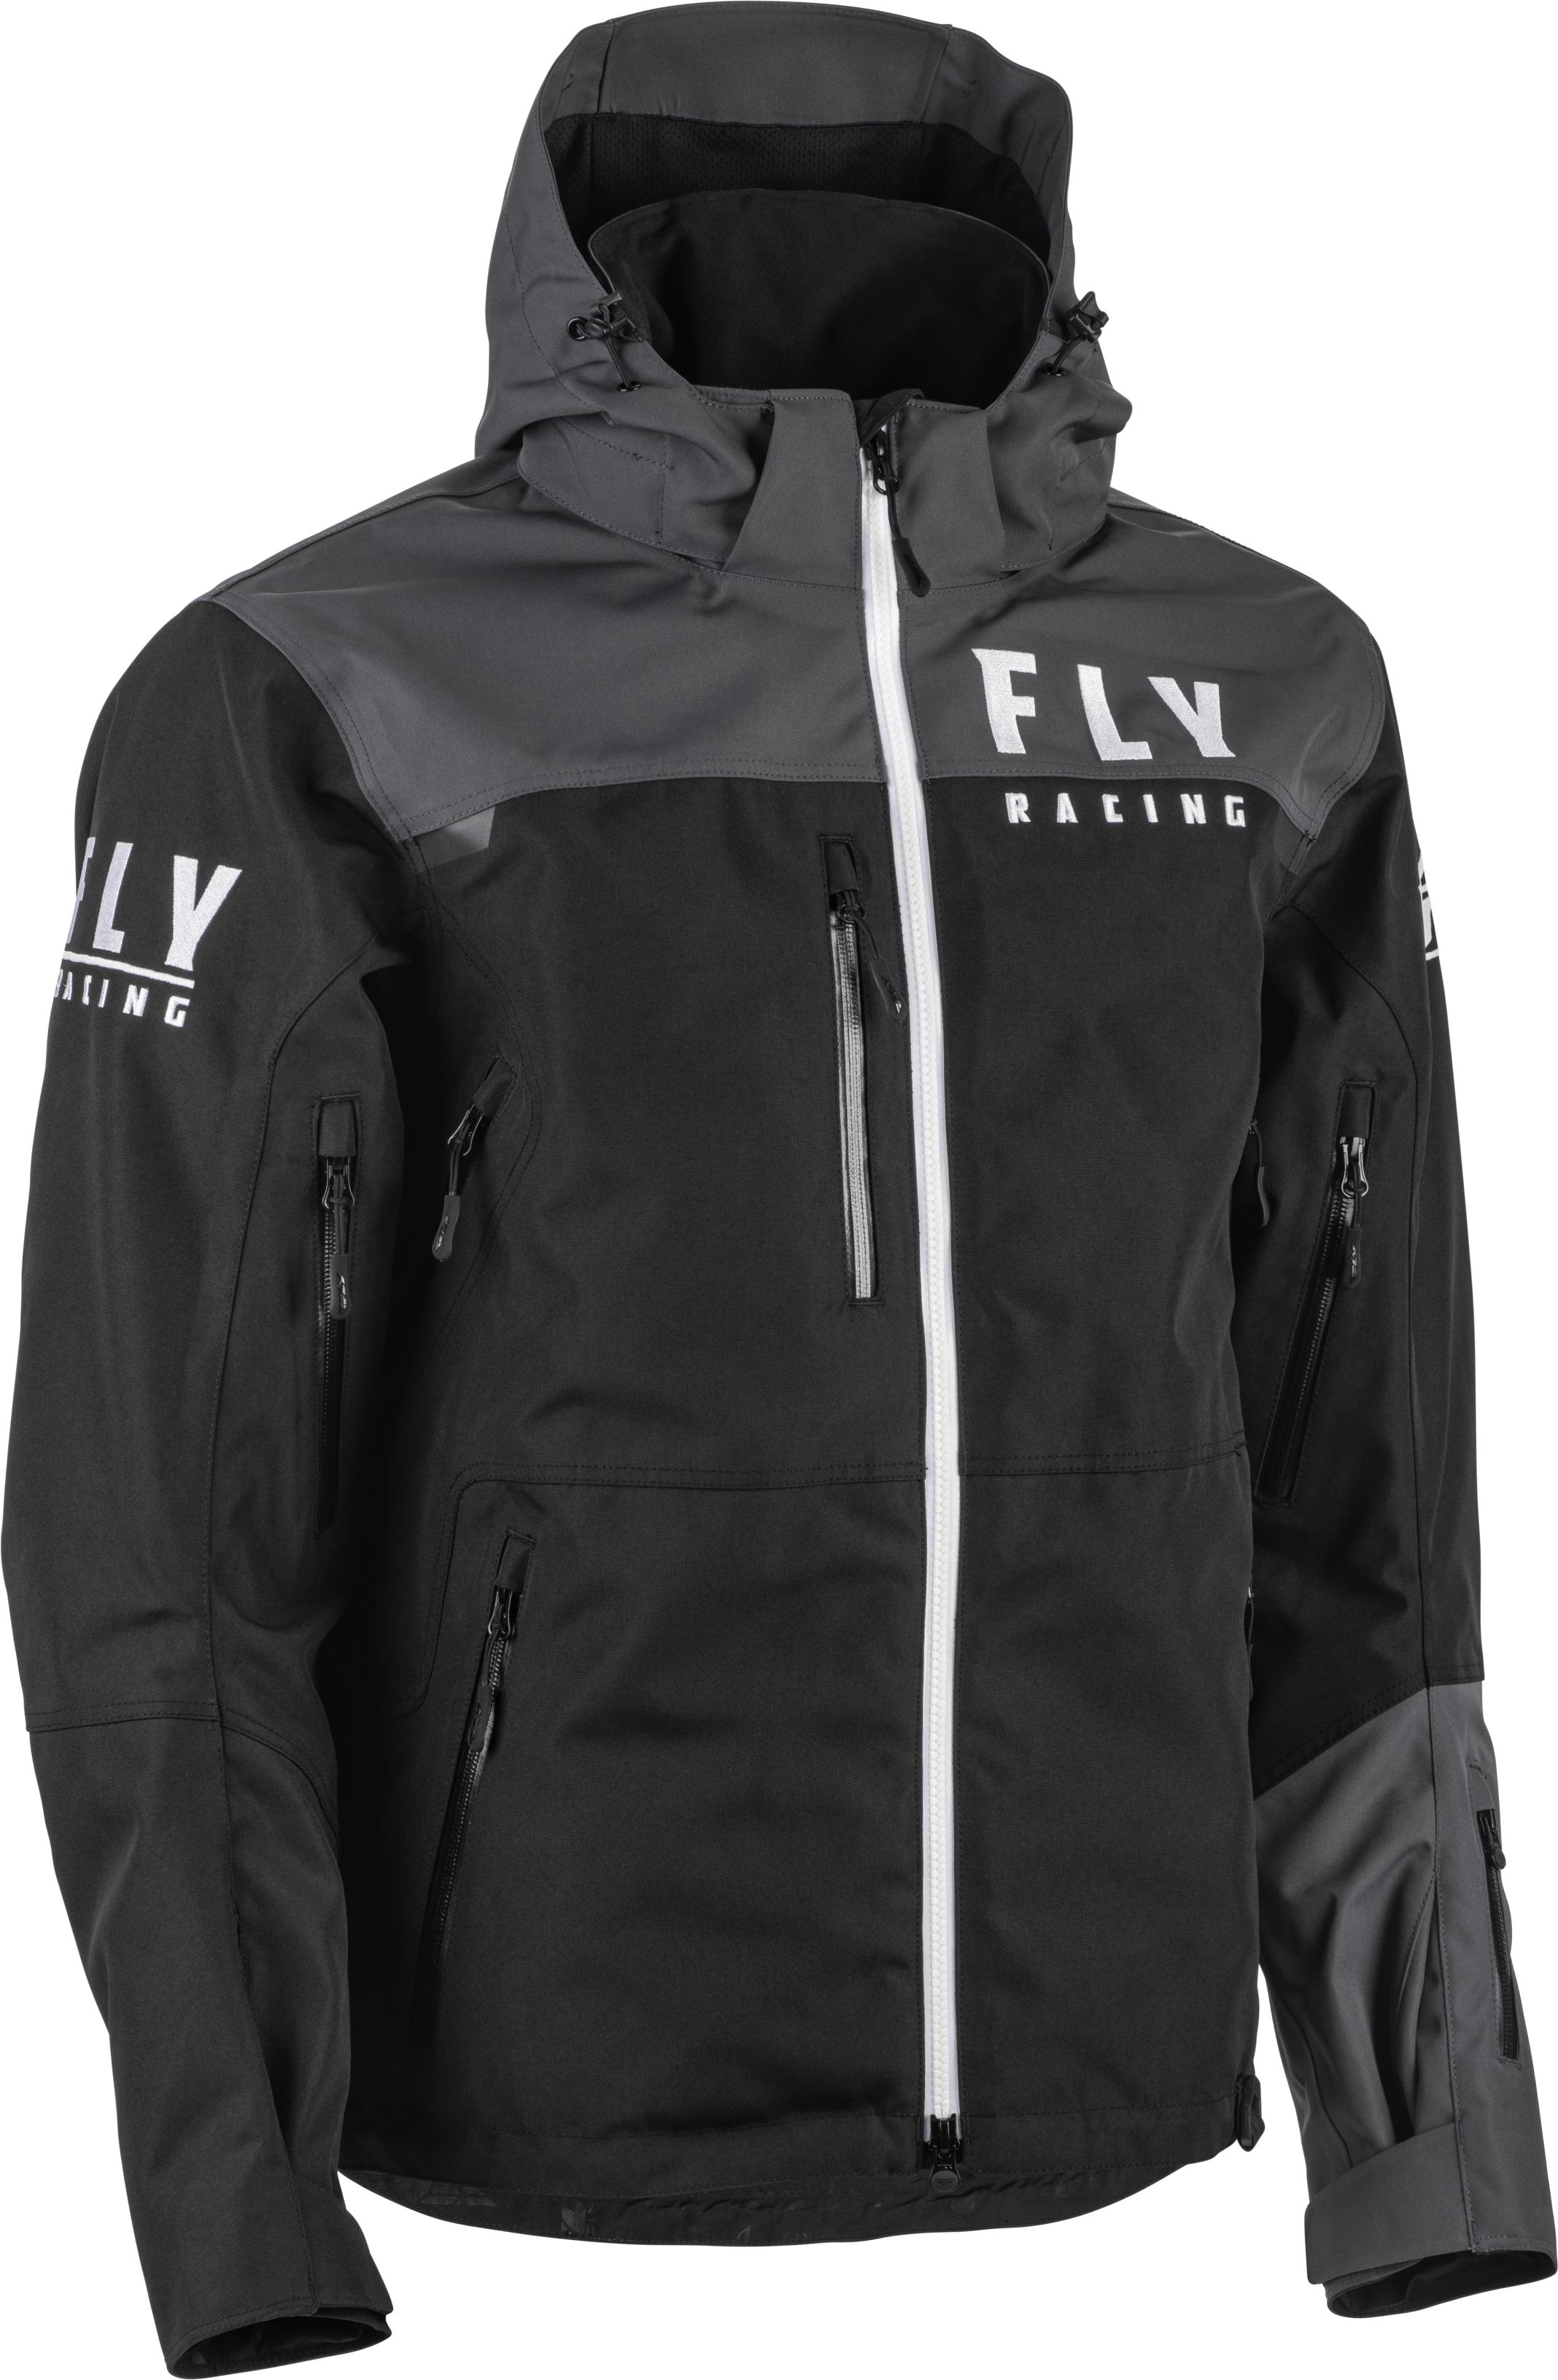 Fly Racing - Carbon Jacket - 191361220371